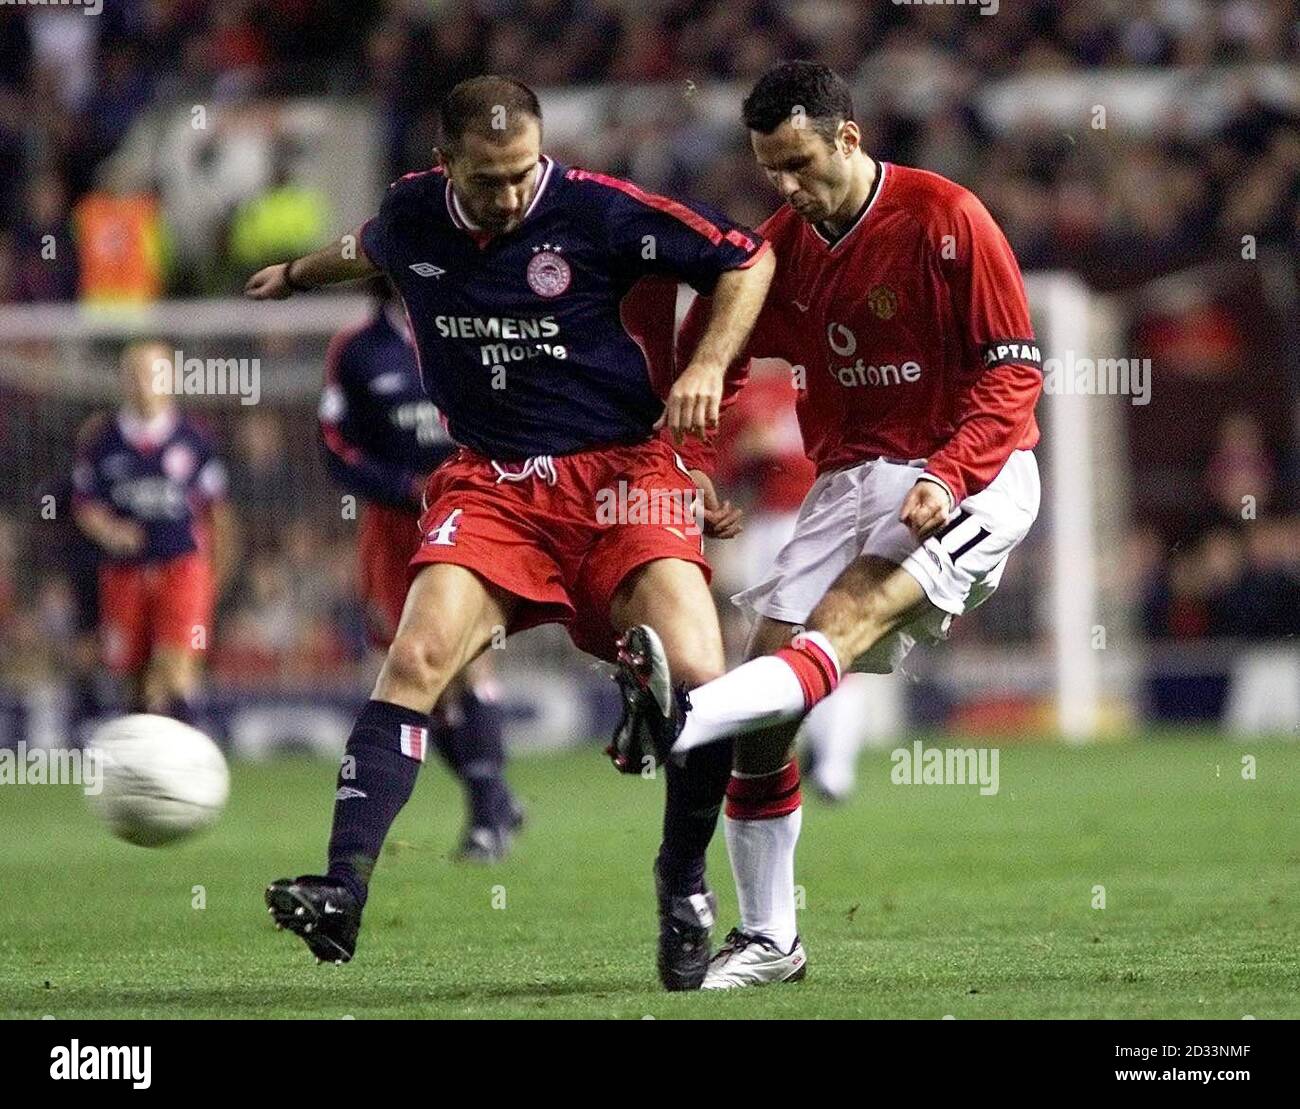 Manchester United's Ryan Giggs (right)gets his cross in past Olympiakos  Dimitrios Mavrogenidis during the UEFA Champions League Group G match at  Old Trafford, Manchester. THIS PICTURE CAN ONLY BE USED WITHIN THE